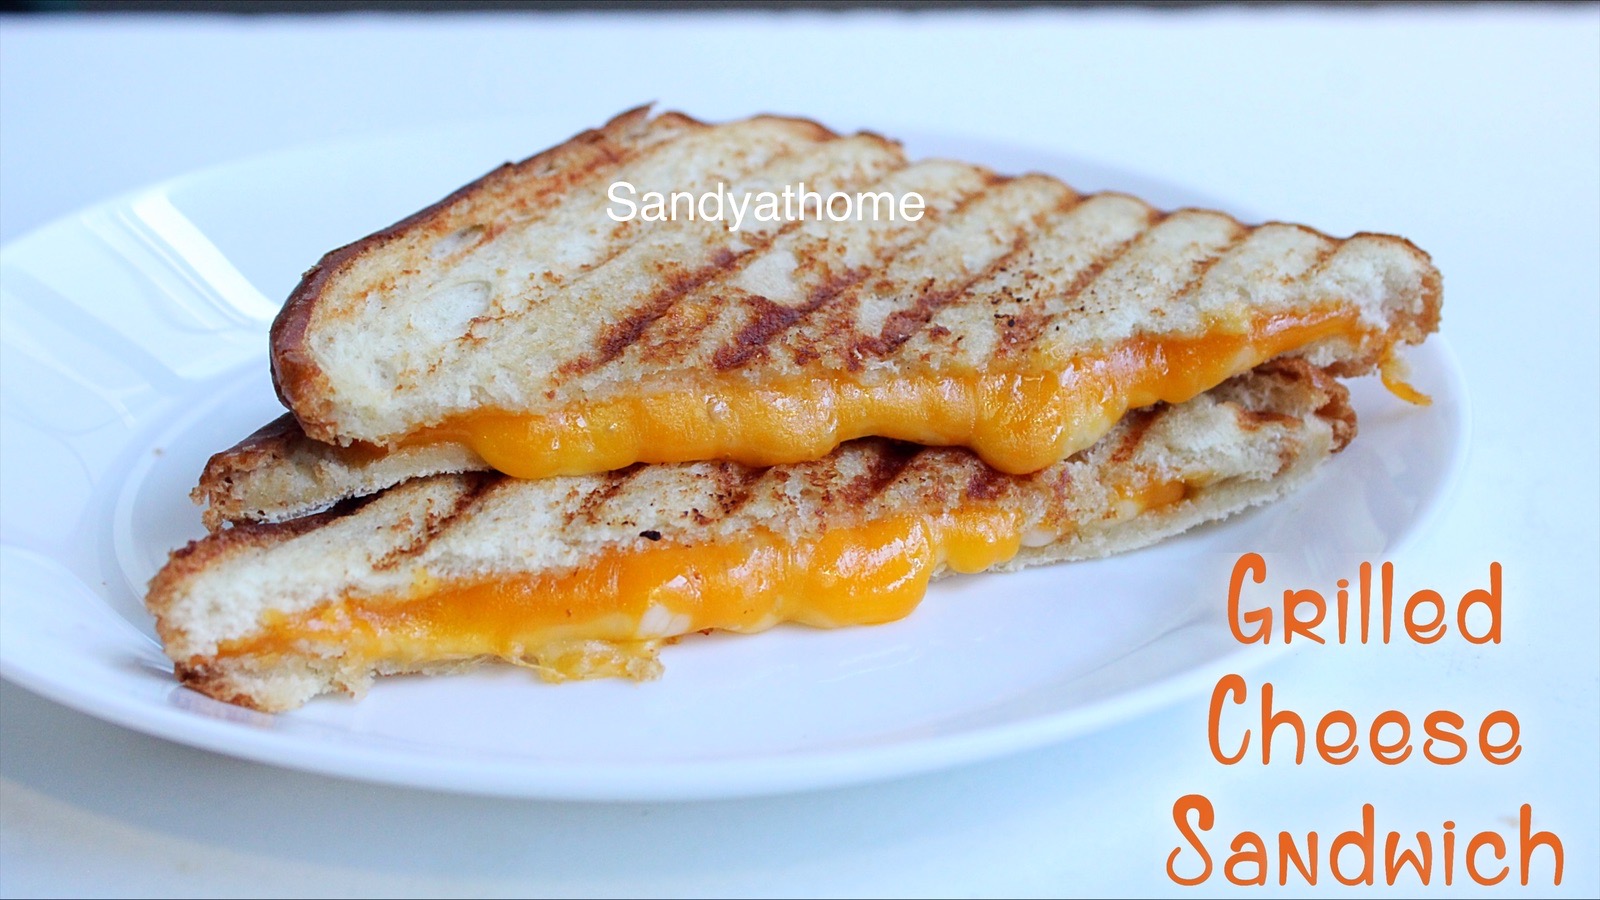 Grilled cheese sandwich recipe